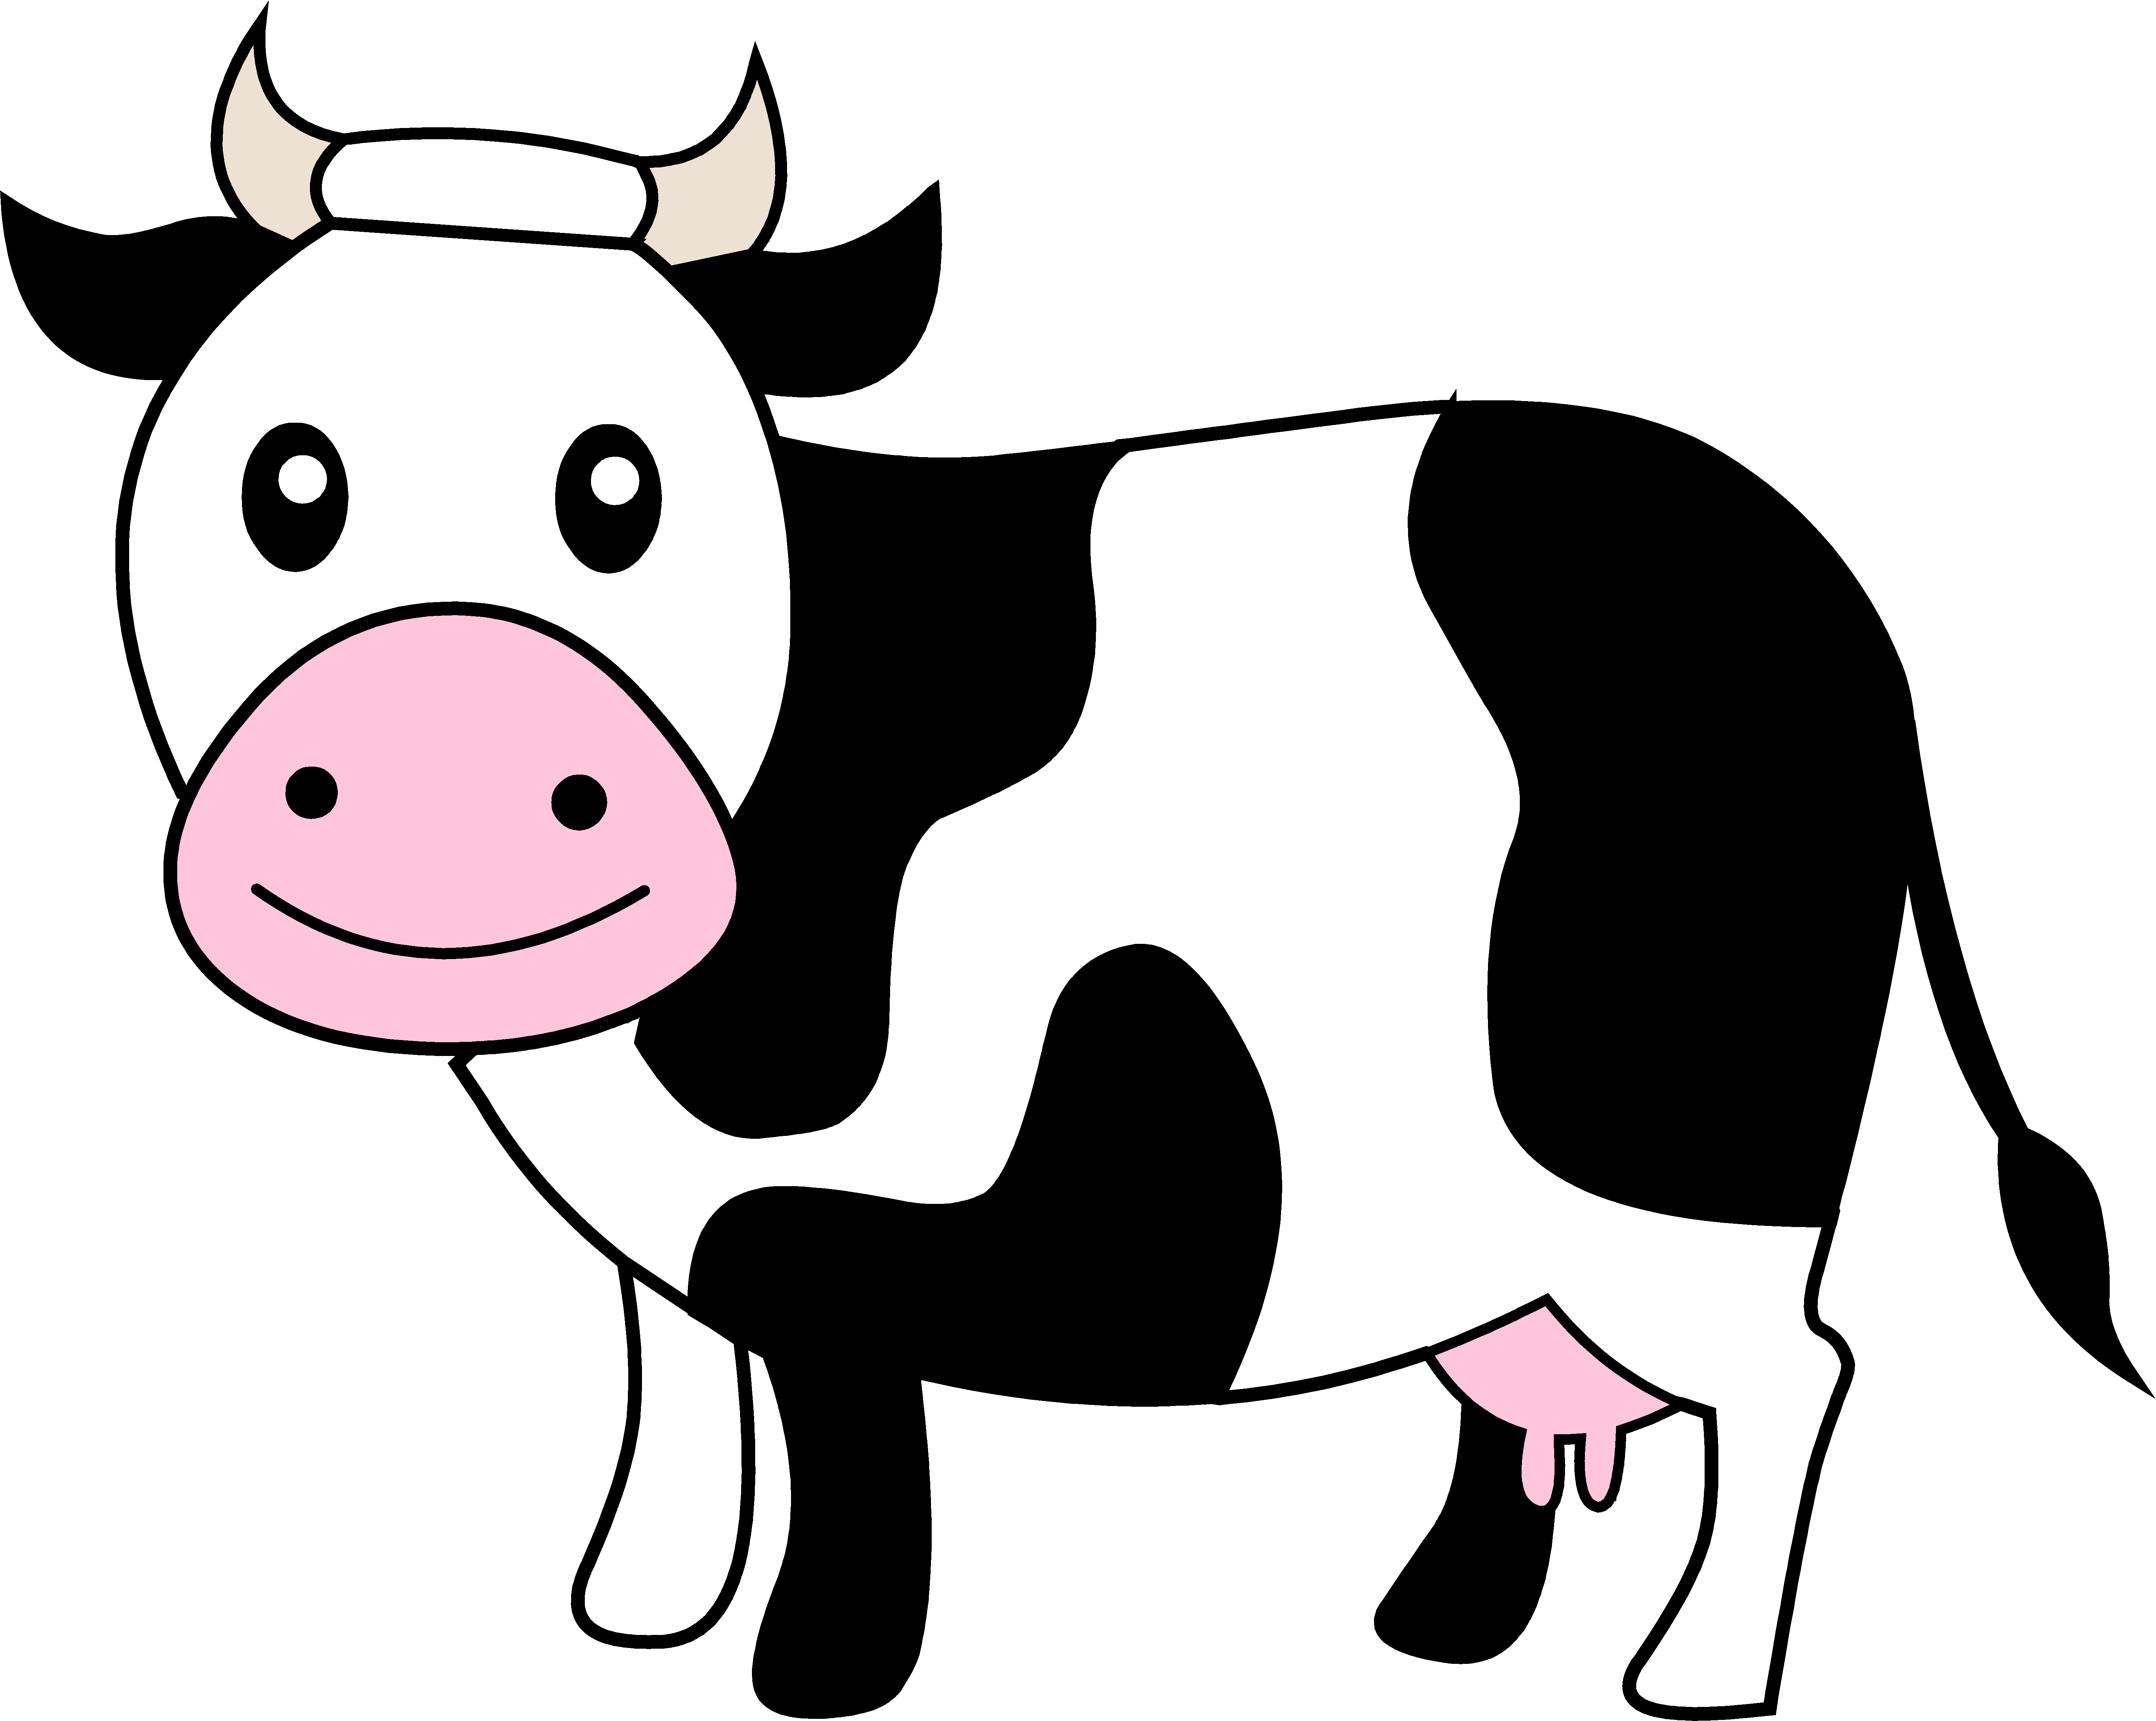 Cow Template Printable - ClipArt Best